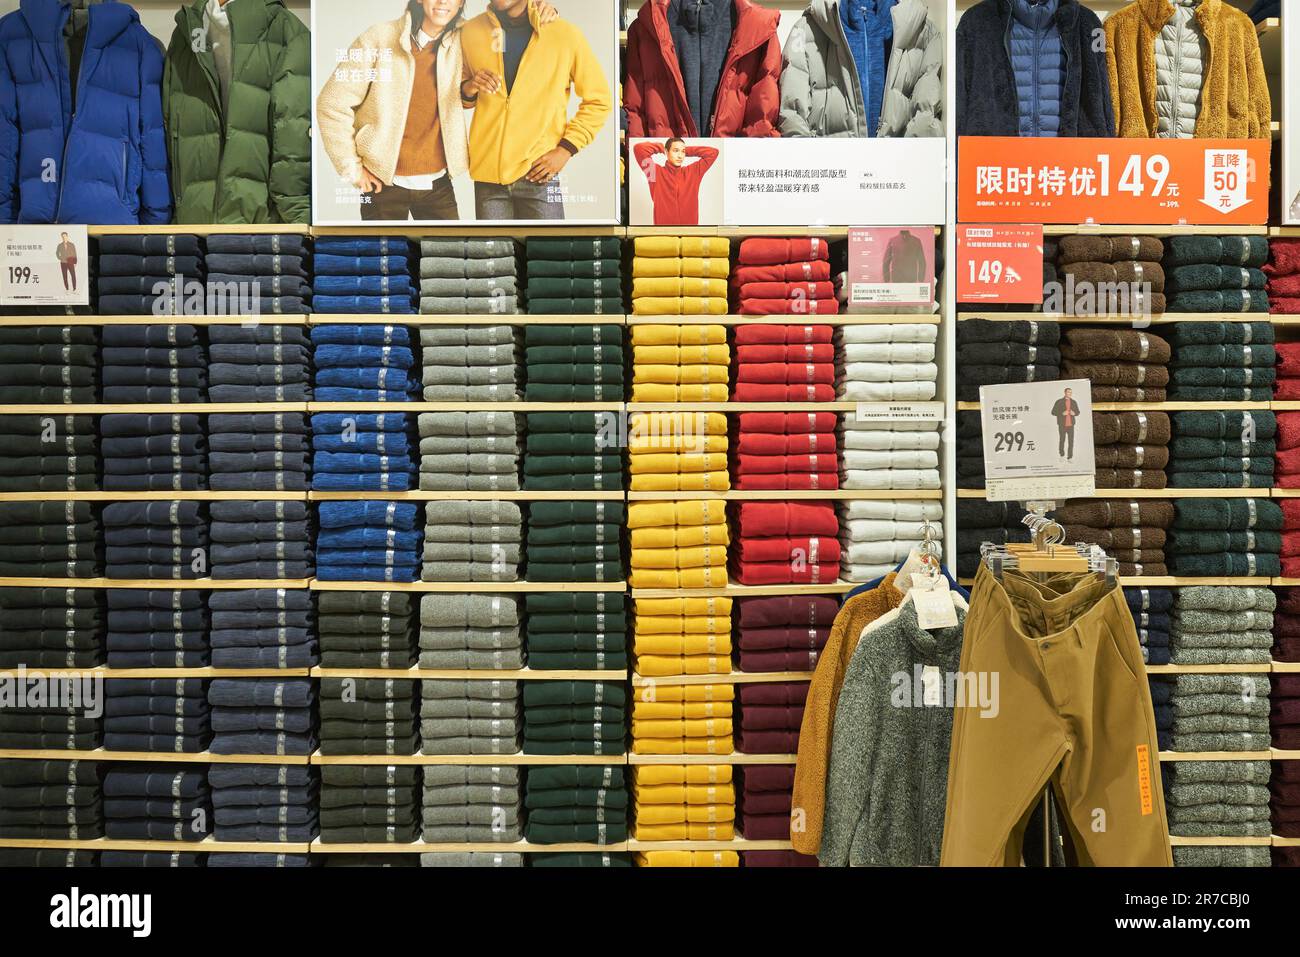 MOSCOW, RUSSIA - SEPTEMBER 14, 2019: Interior Shot Of Uniqlo Store